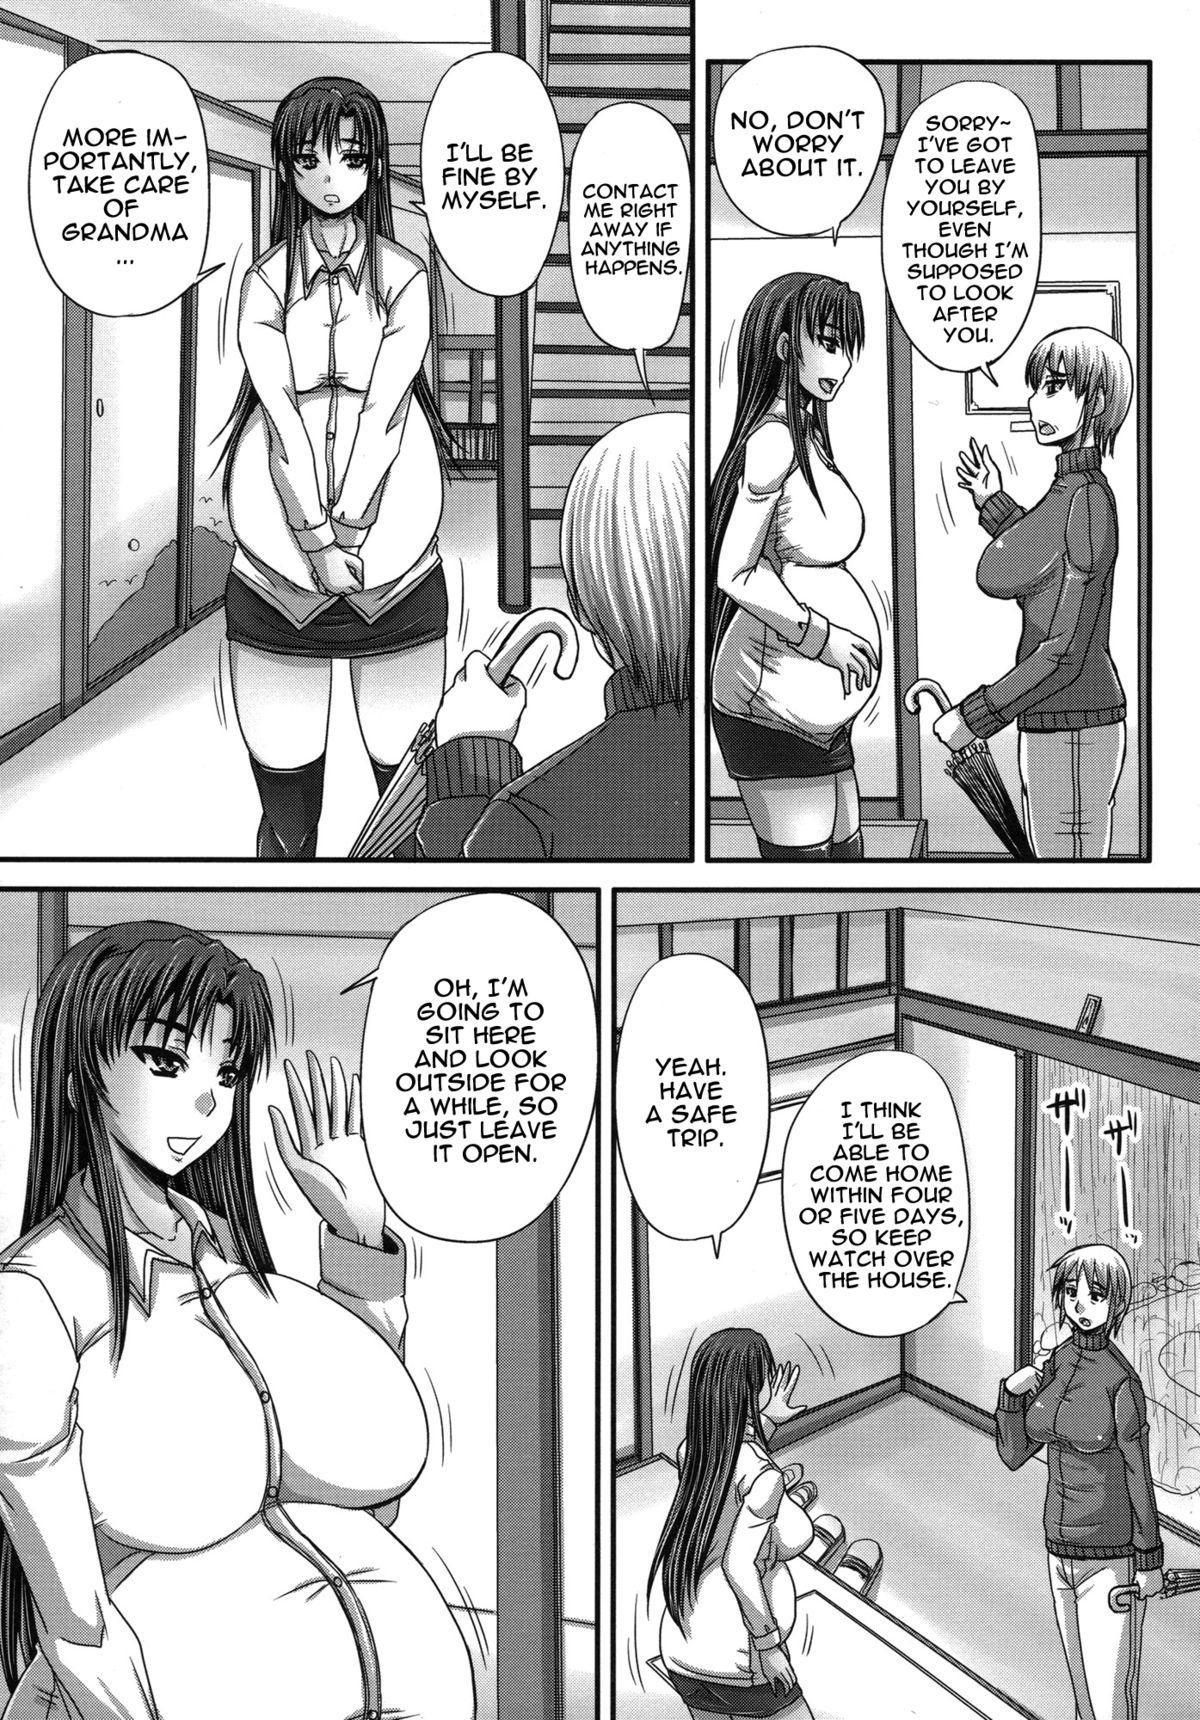 [Akigami Satoru] Tsukurou! Onaho Ane - Let's made a Sex Sleeve from Sister | Turning My Elder-Sister into a Sex-Sleeve [English] {doujin-moe.us} 69